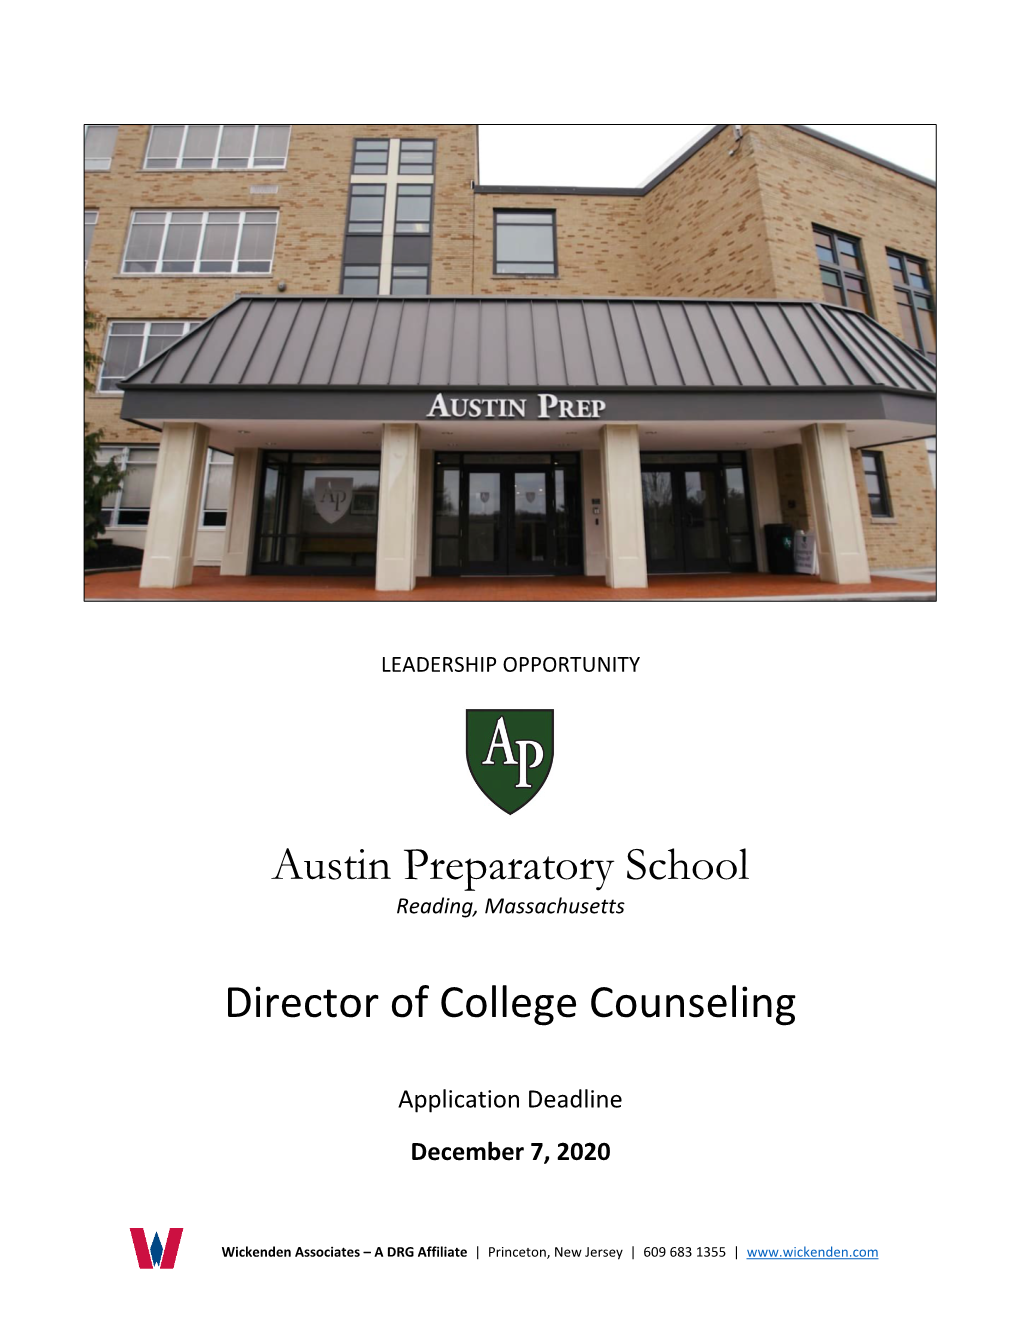 Austin Preparatory School Director of College Counseling